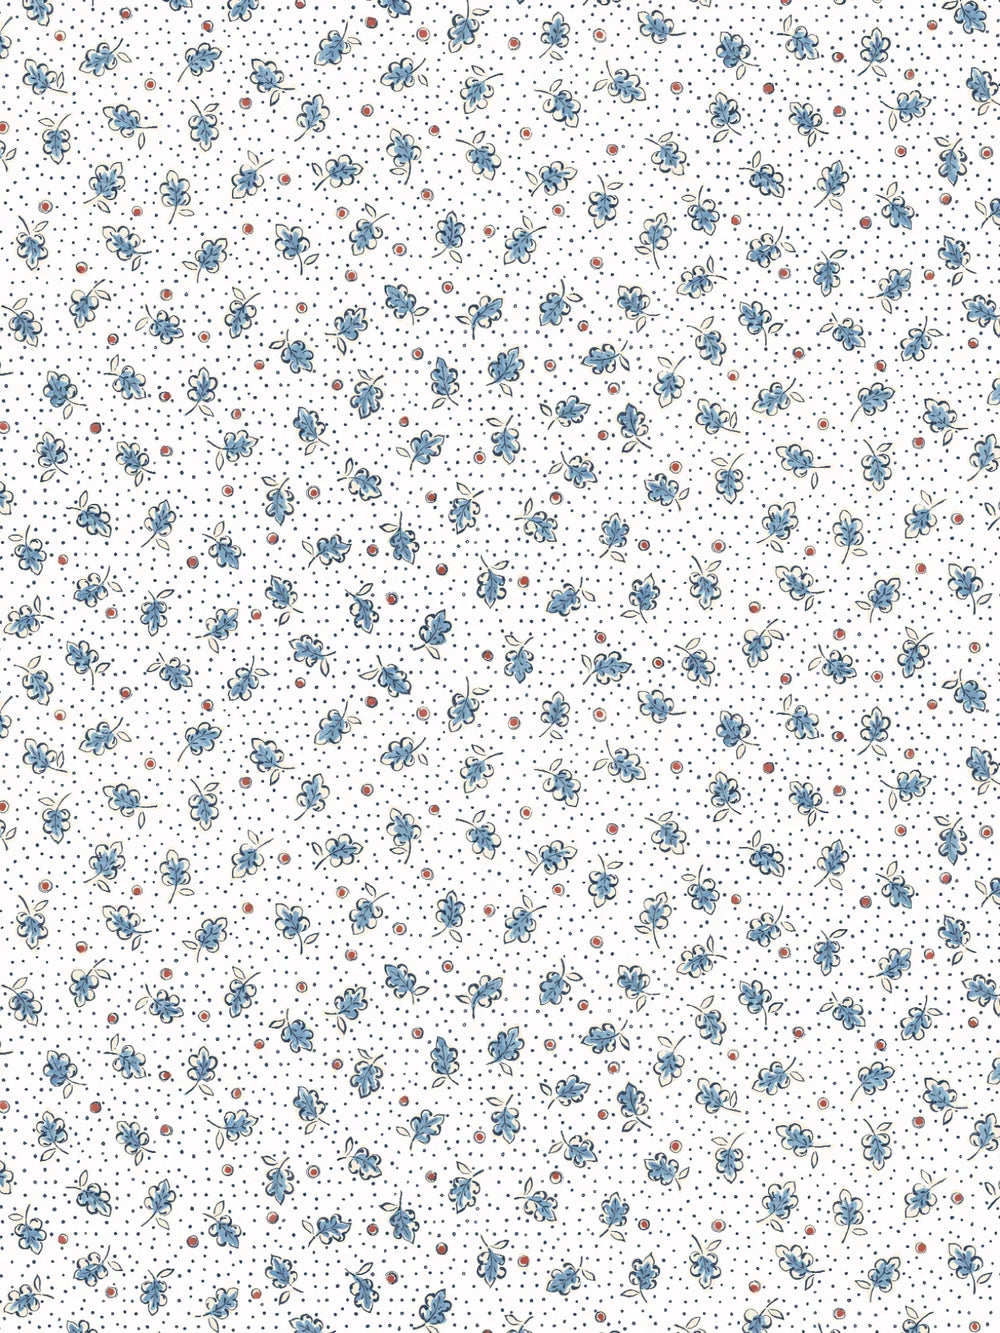 mille-feuilles-wallpaper-white-blue-red-dainty-leaves-dots